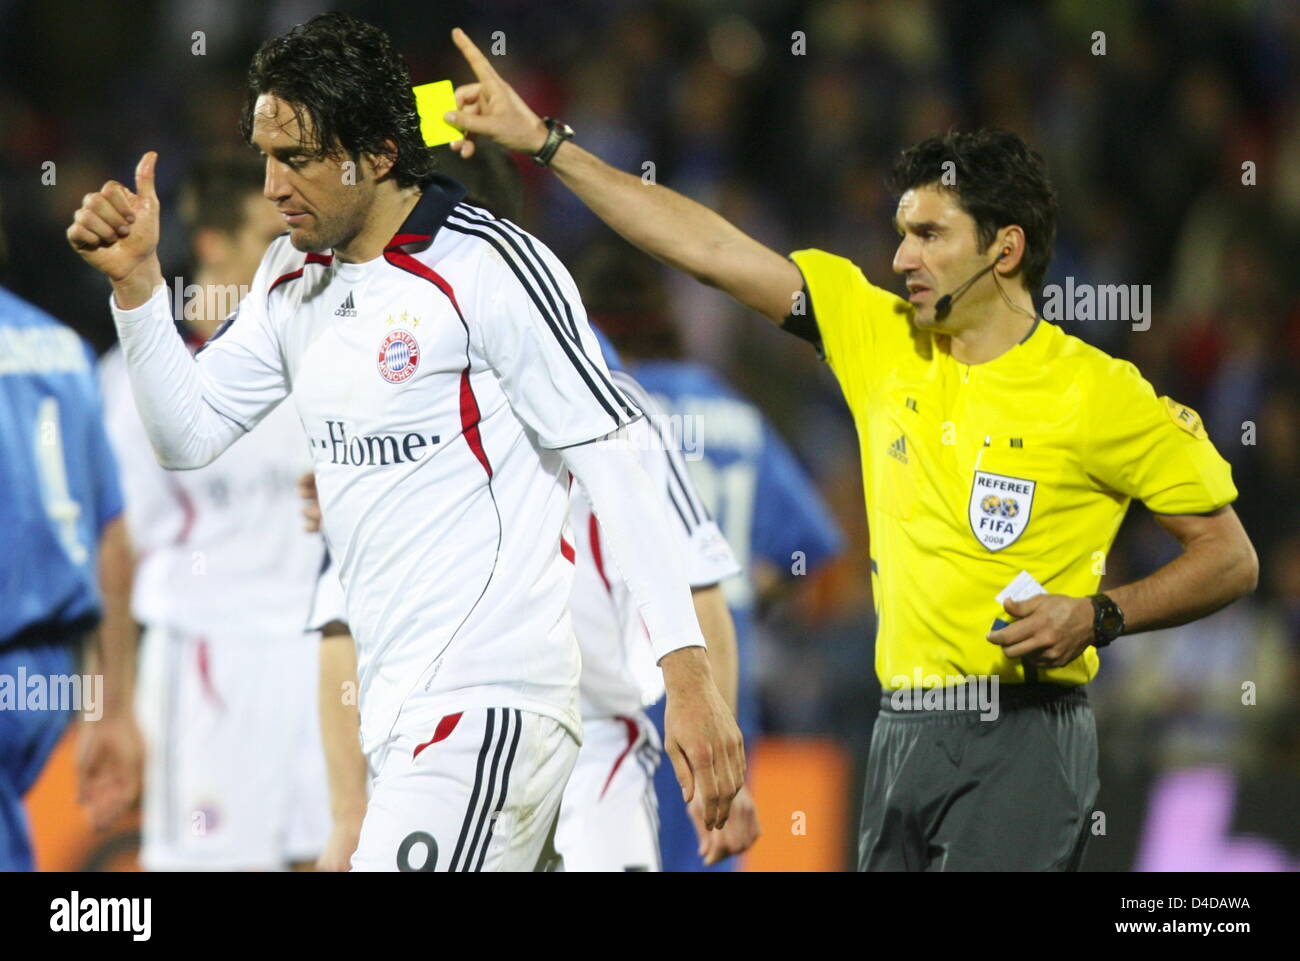 Referee Massimo Busacca (R) shows Munich's Luca Toni the yellow card during  second leg UEFA Cup quarter finals soccer match Getafe CF vs. Bayern Munich  at Coliseum Alfonso Perez stadium, in Getafe,